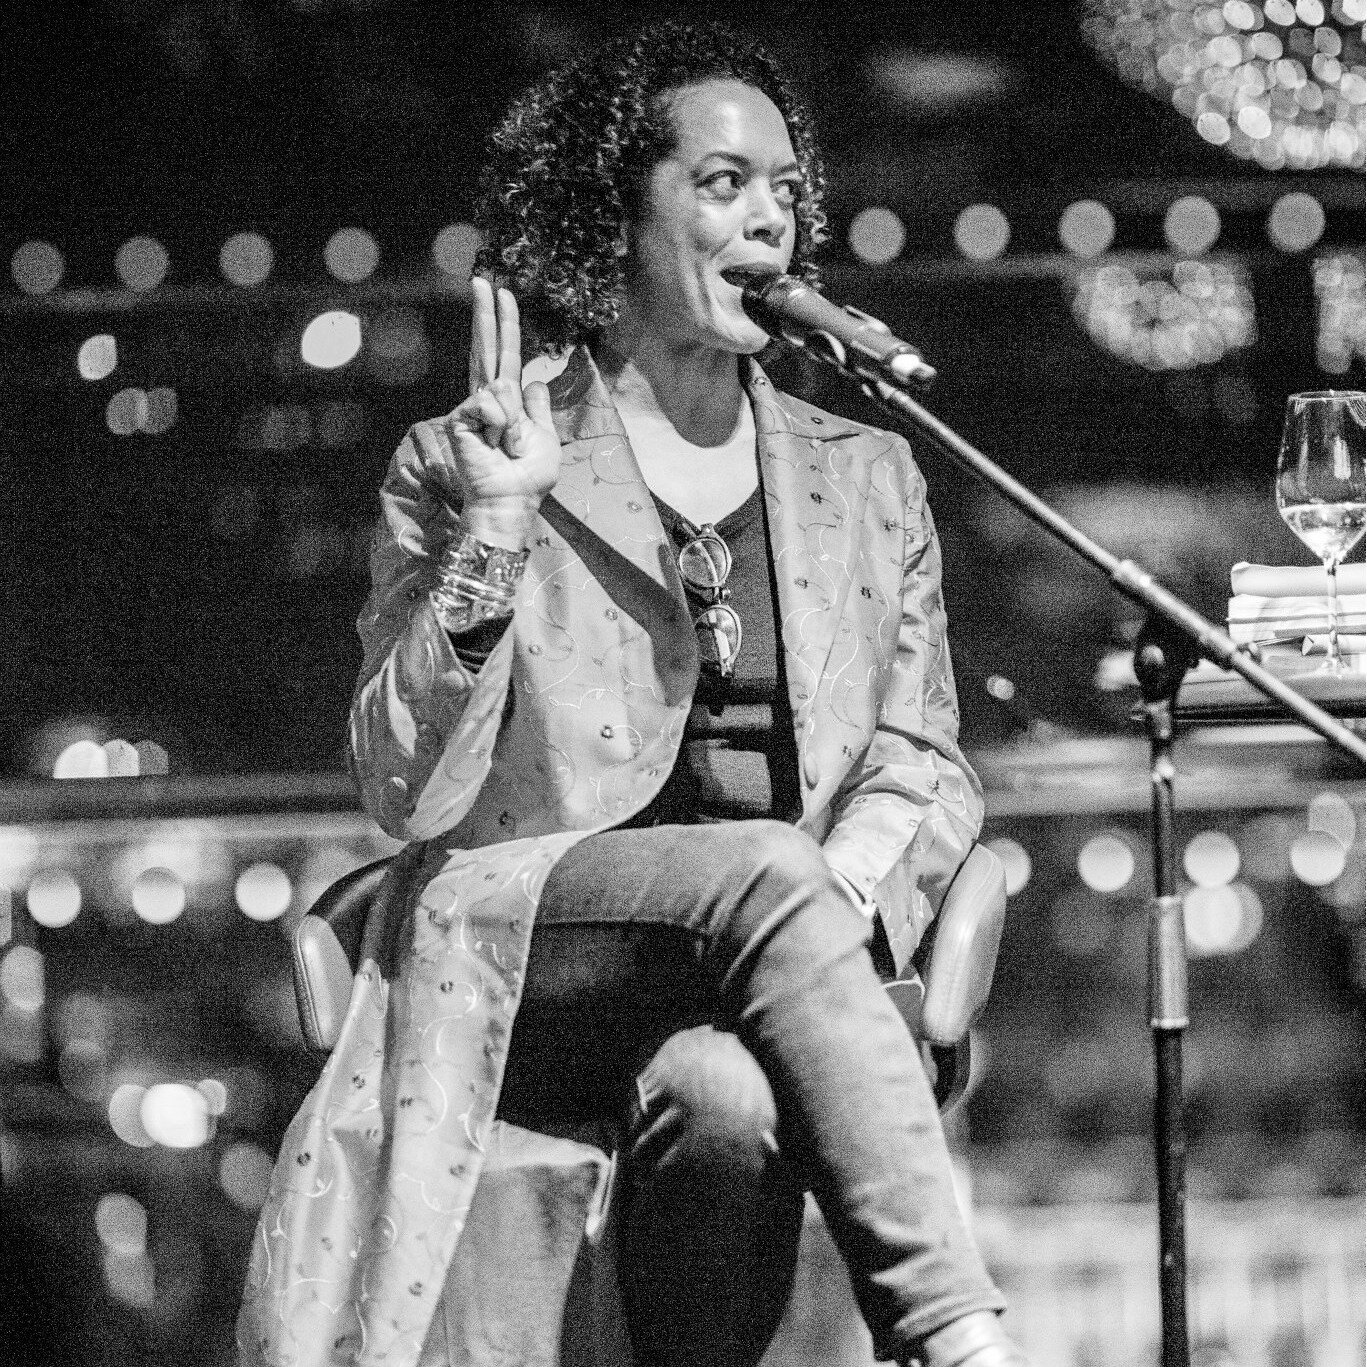 In January 2015 Aminatta Forna took to the stage and gave us a reading from 'The Hired Man' (and taught us how to load a gun!). She wowed us all!
.
This was our first Salon in the Rumpus Room at The Mondrian London (@seacontainersldn ). Our other gue